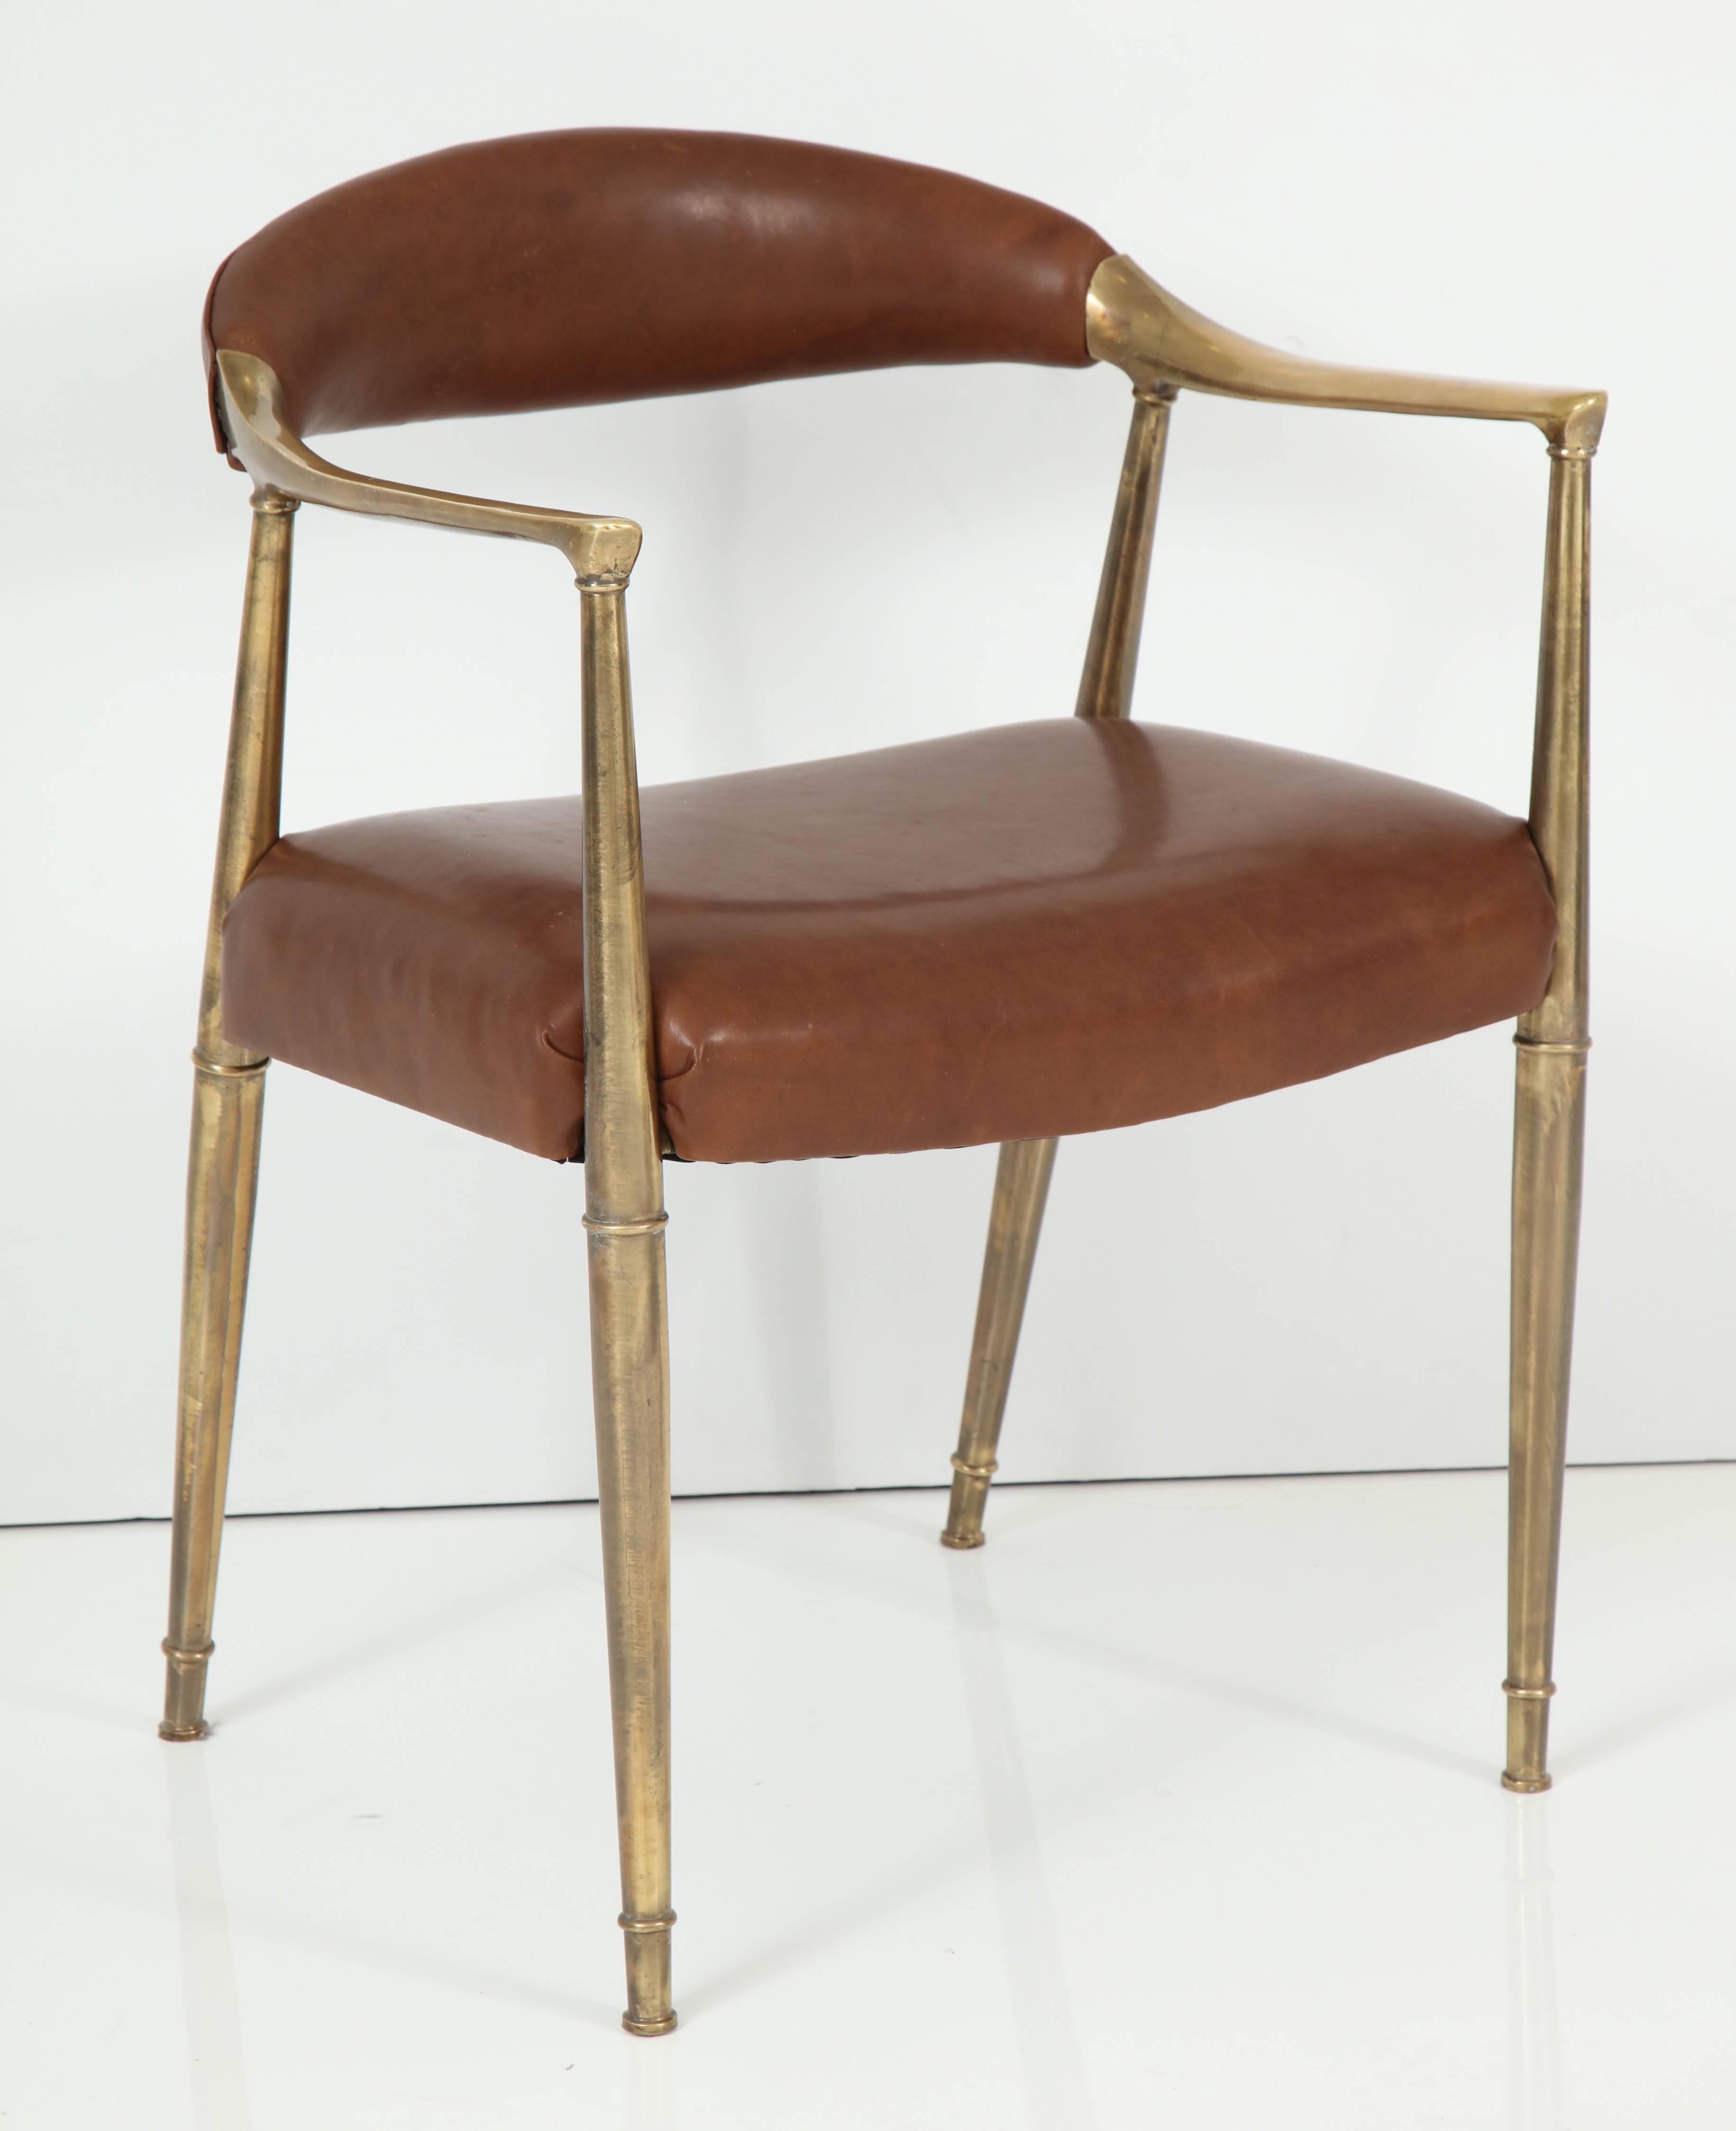 Elegant solid brass armchair, Italian 1960s. Elegant form very reminiscent of the chair by Hans Wegner. Newly upholstered in saddle leather; beautifully repolished brass retains rich natural age patina.